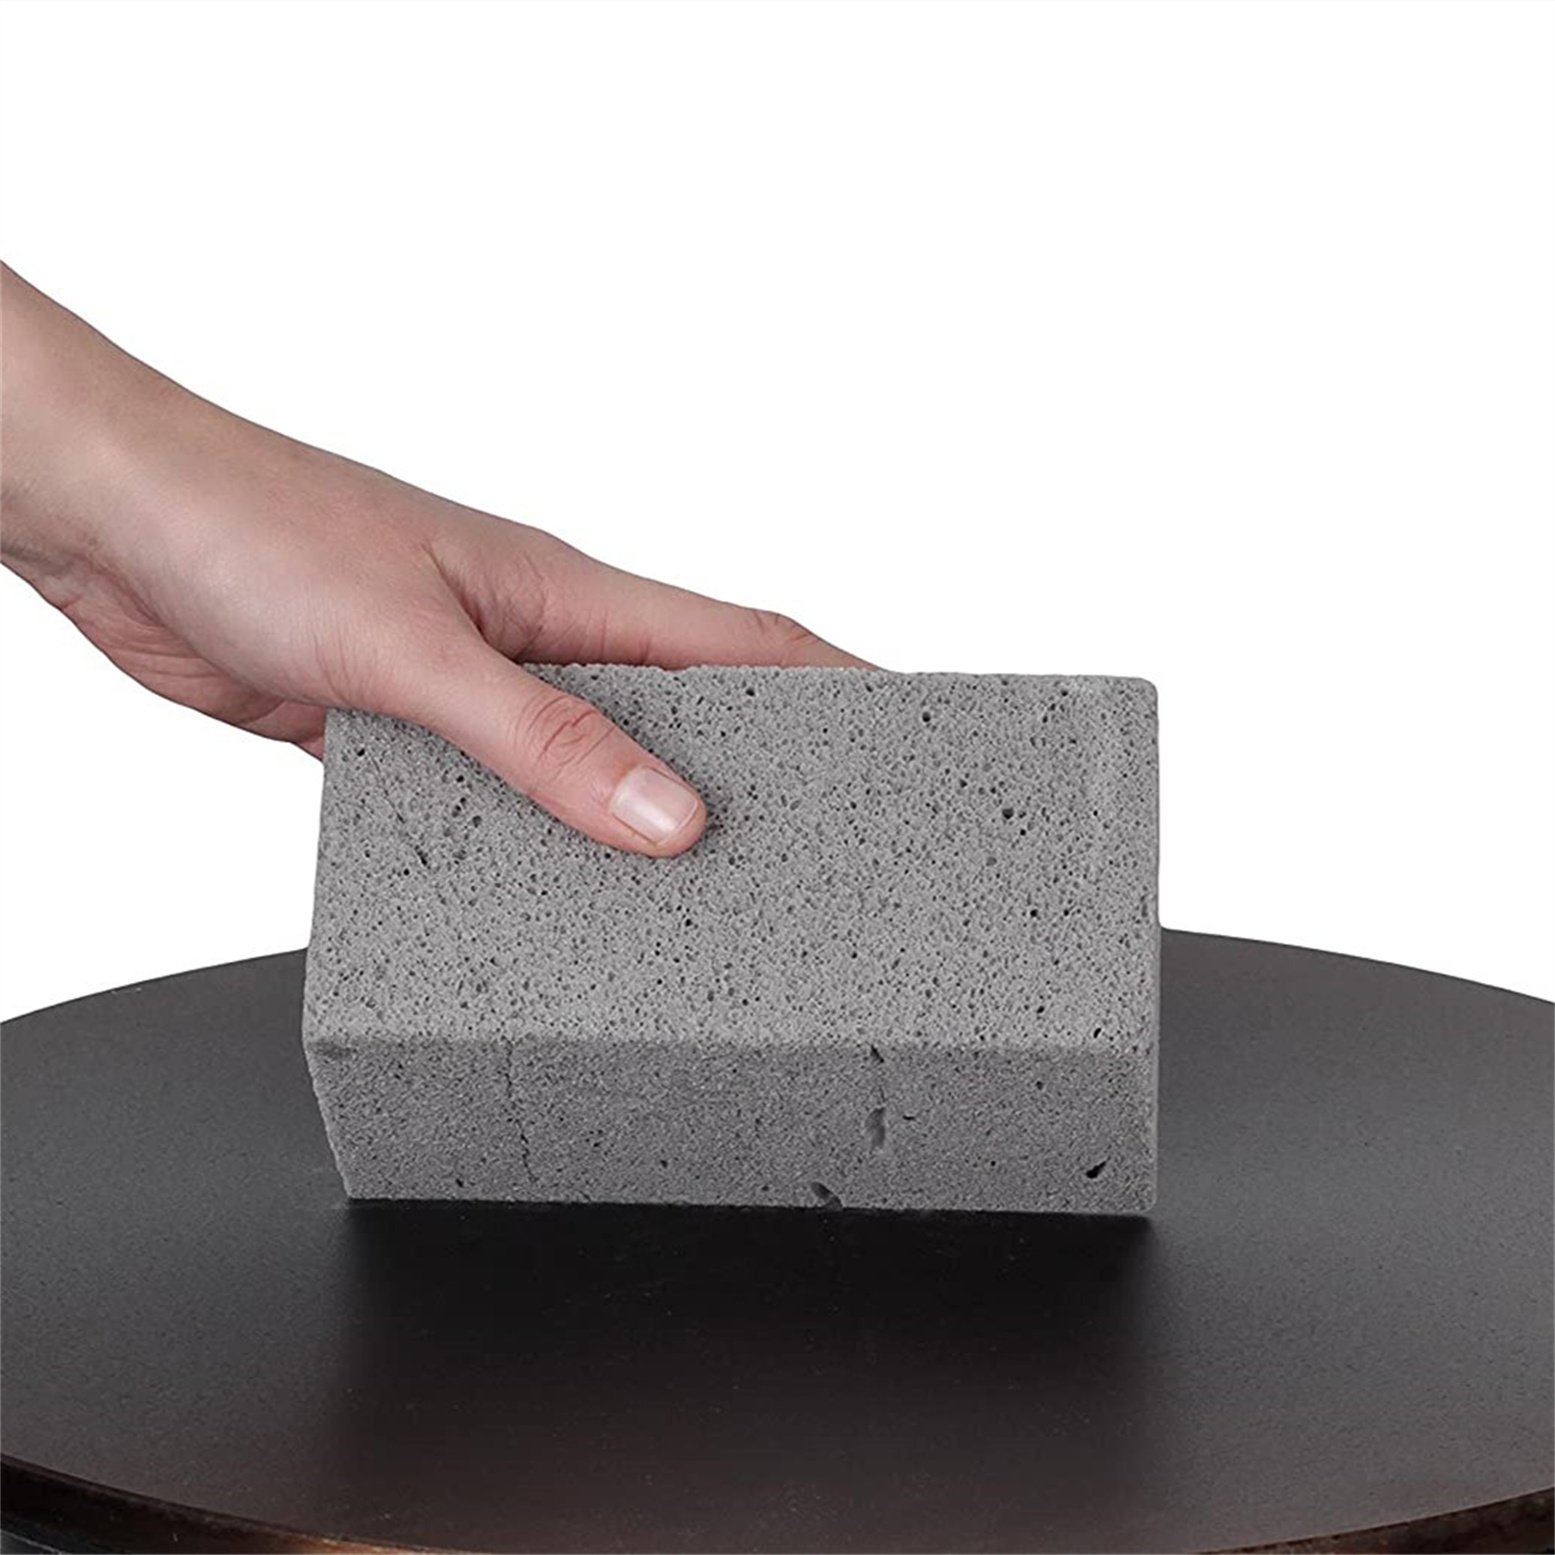 Heavy Duty Grill Cleaning Brick 1 Pack. Commercial Grade Pumice Stone Tool Cleans